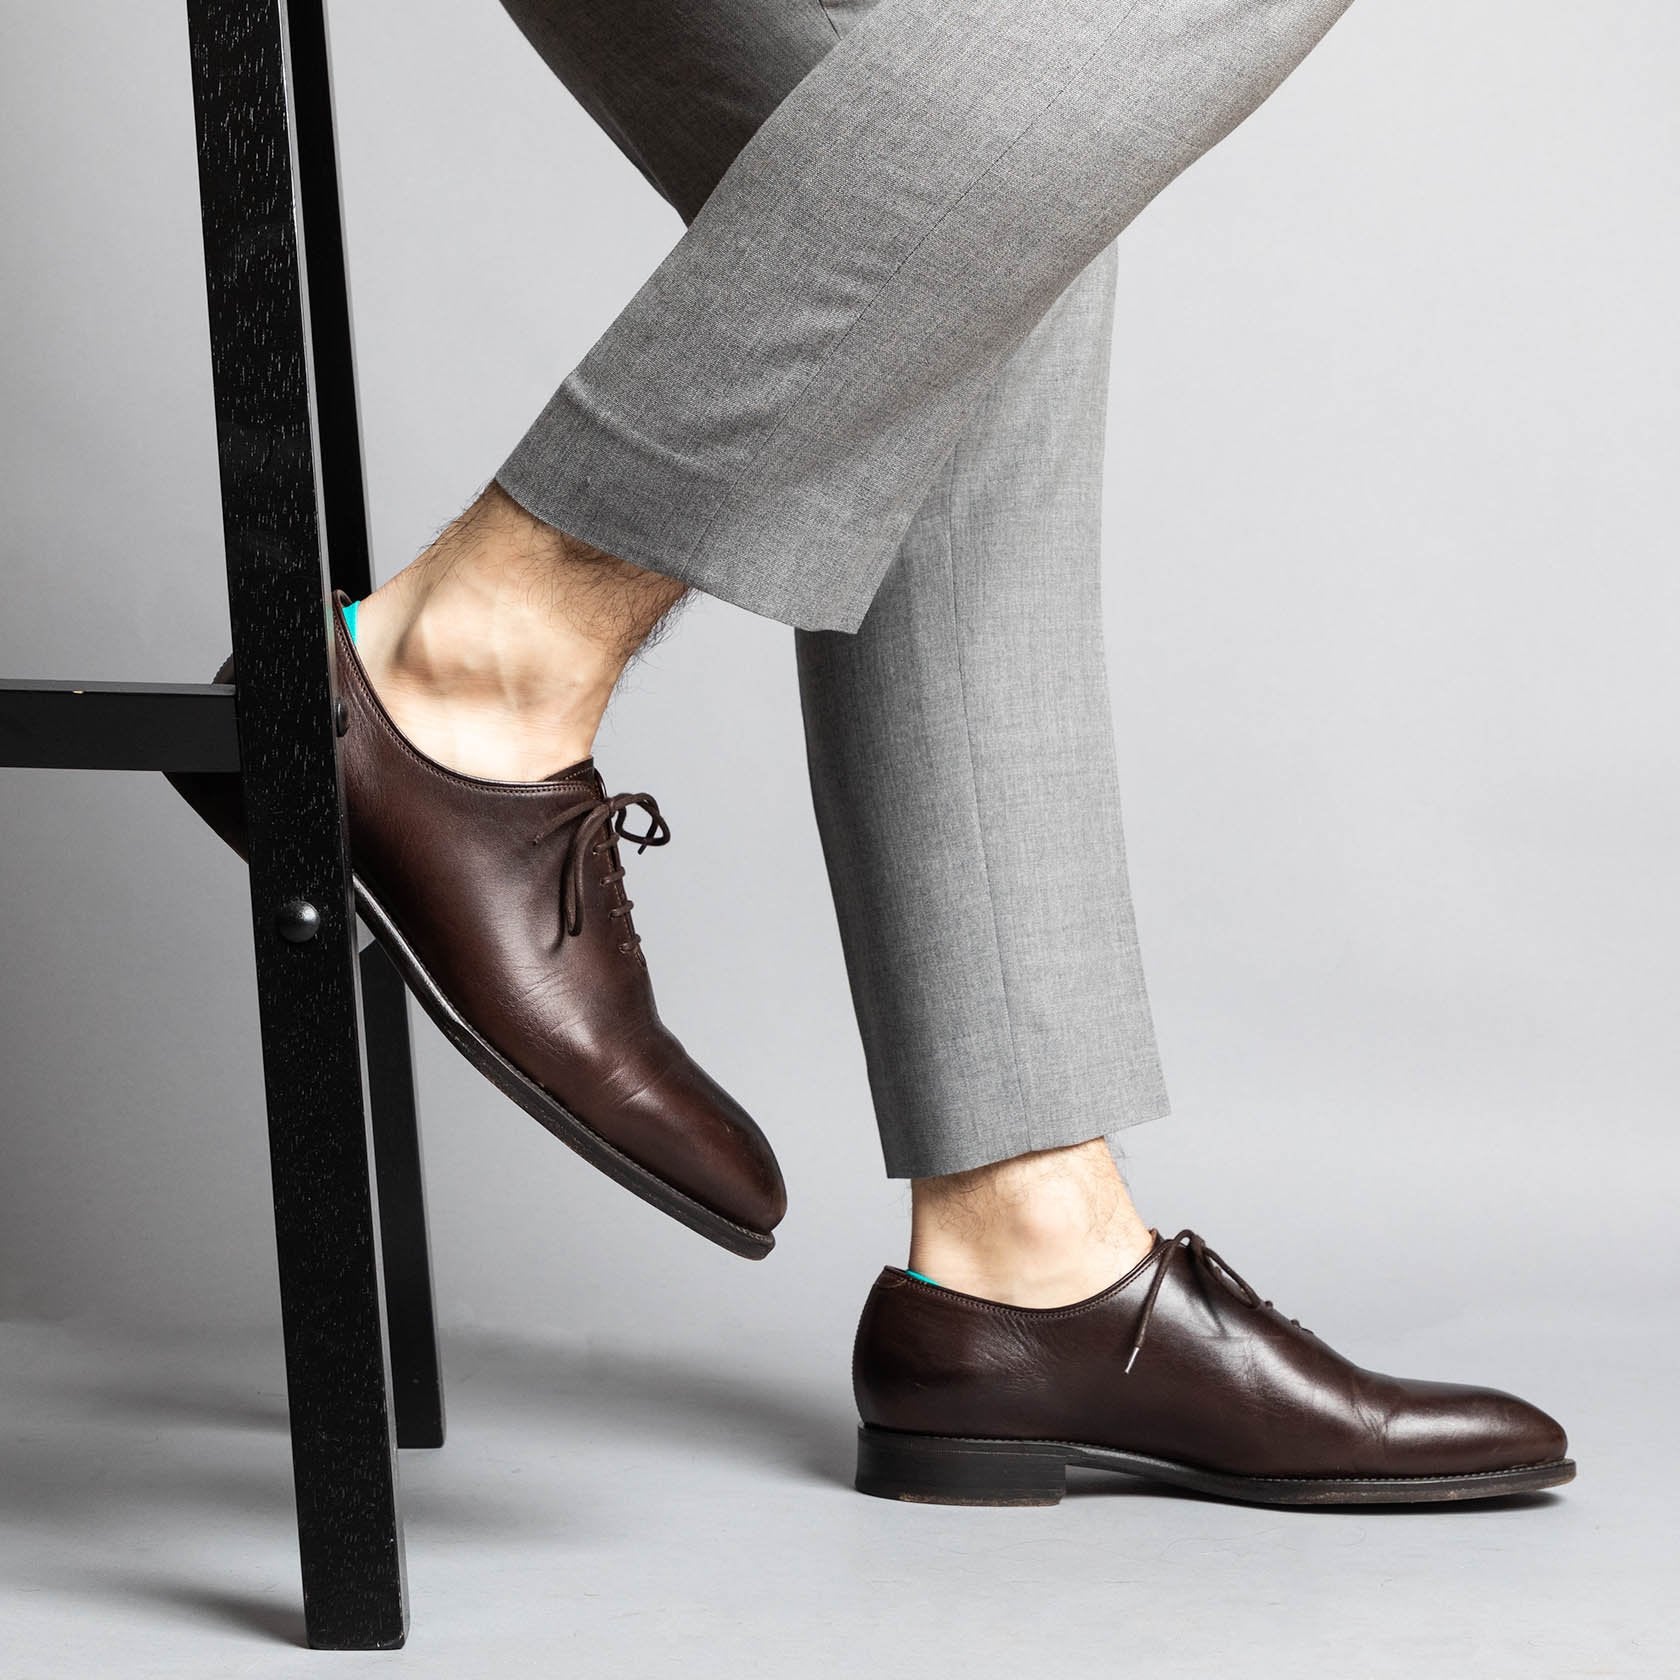 dress shoes with no show socks